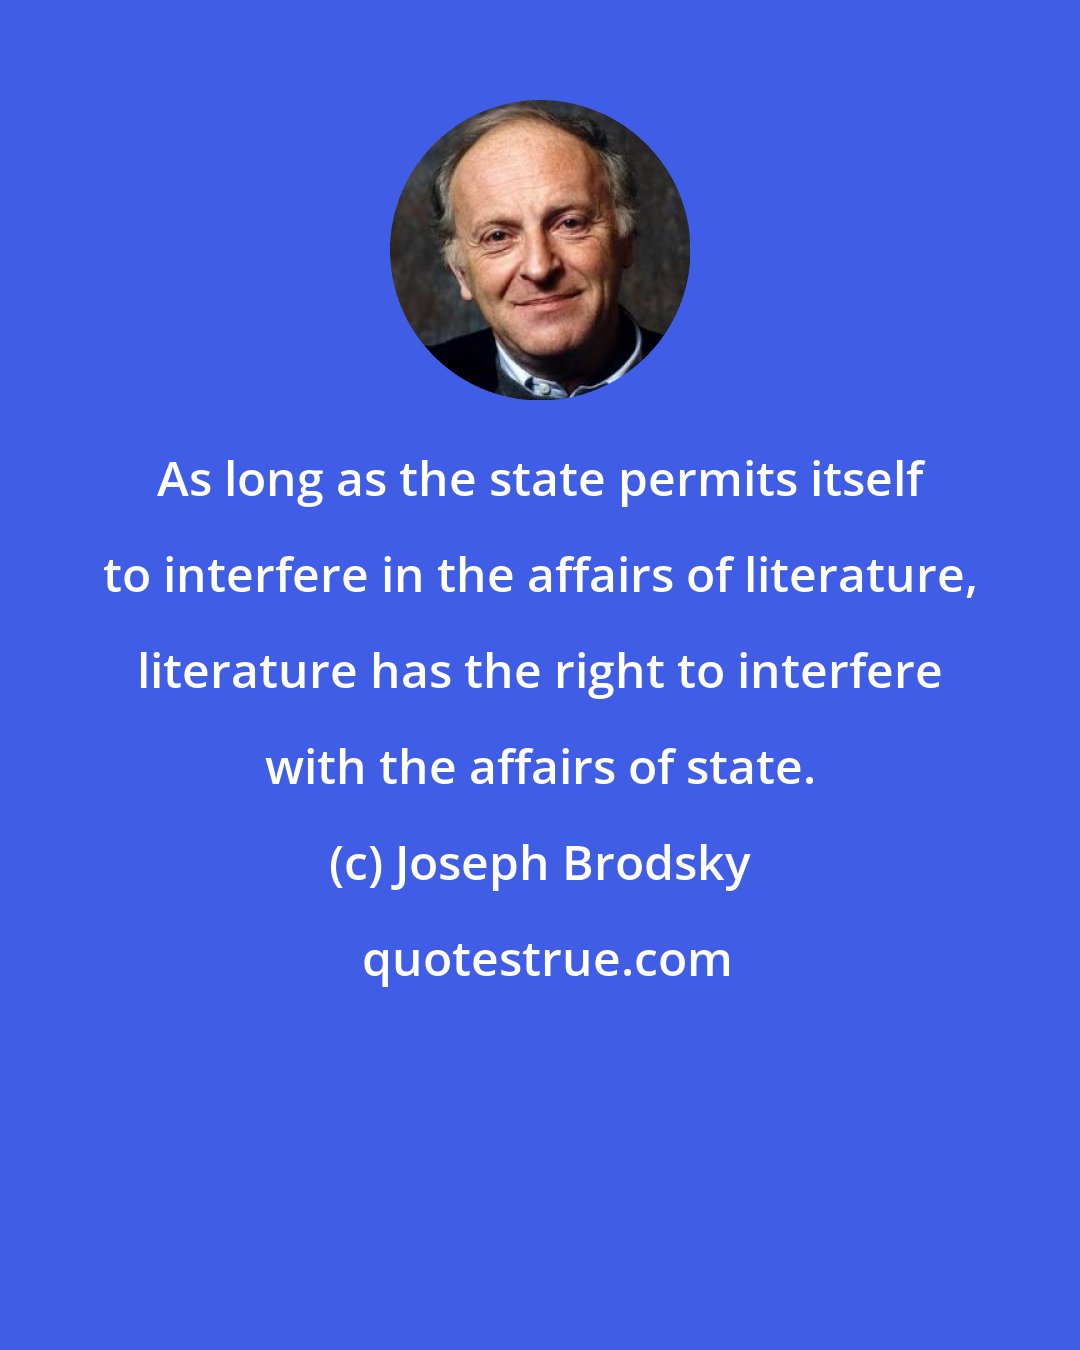 Joseph Brodsky: As long as the state permits itself to interfere in the affairs of literature, literature has the right to interfere with the affairs of state.